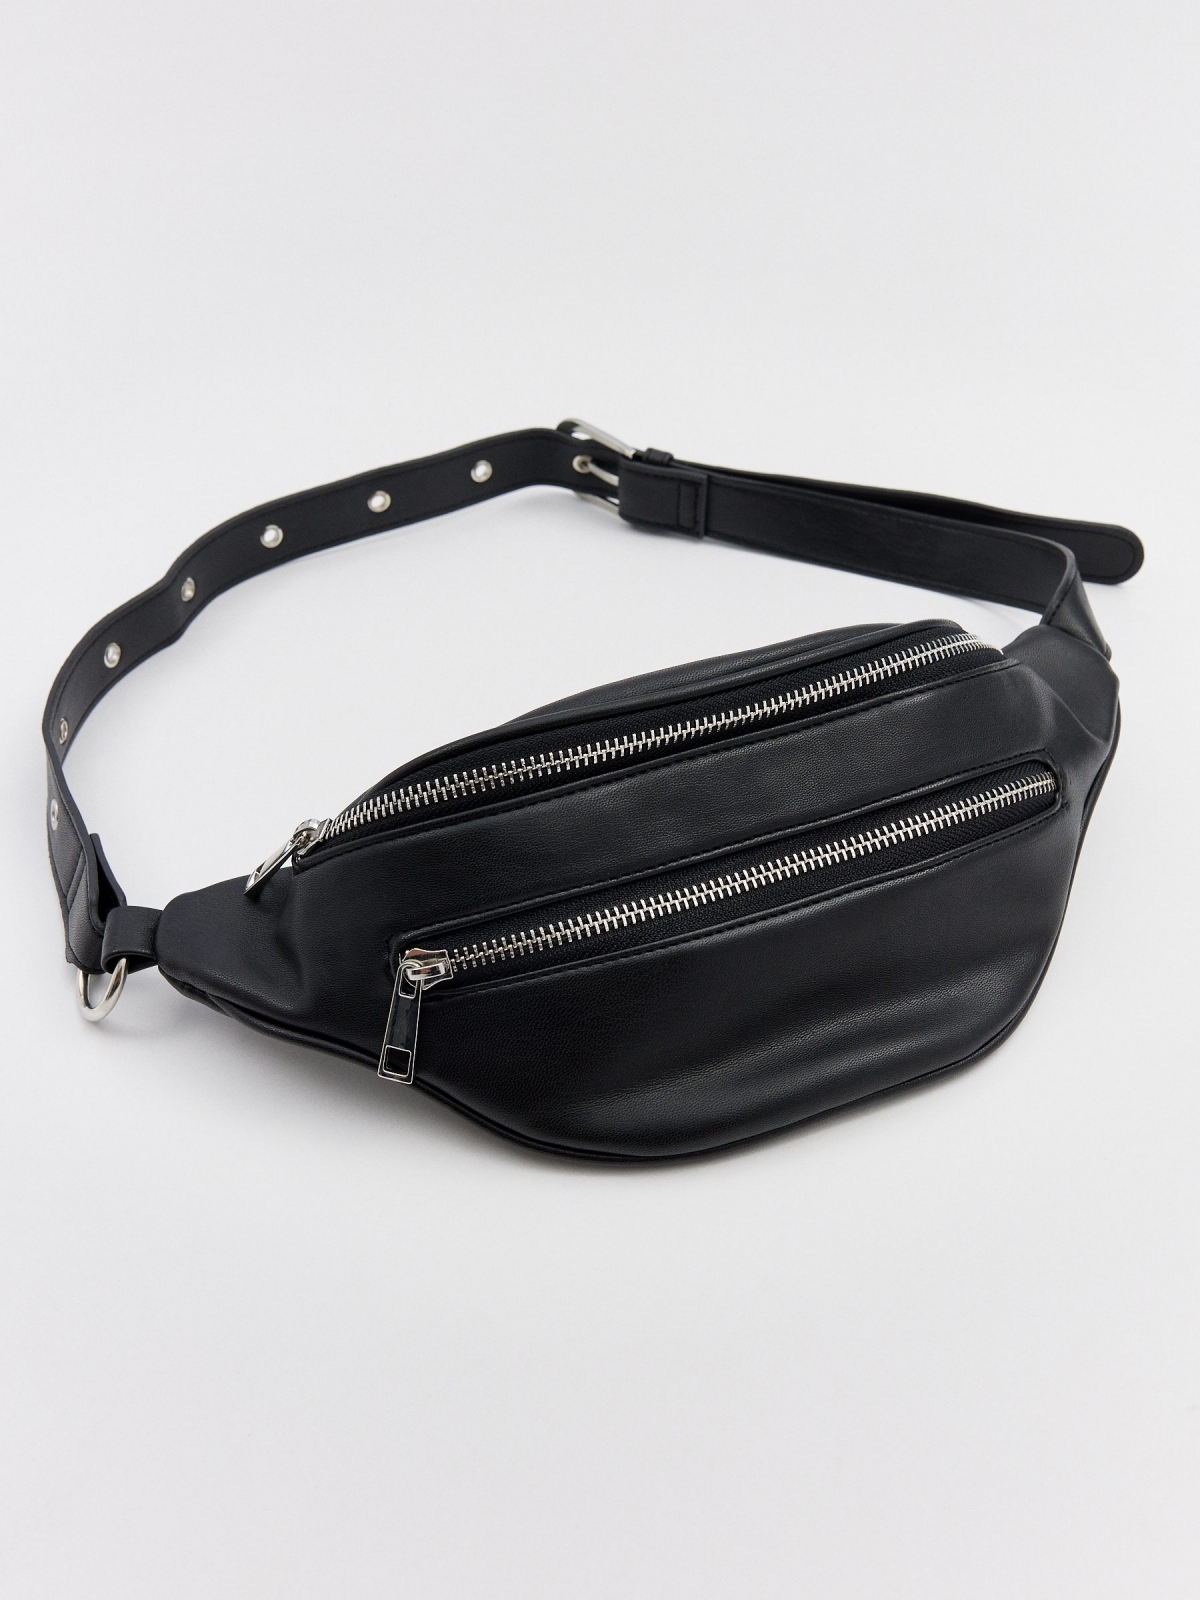 Black faux leather fanny pack detail view